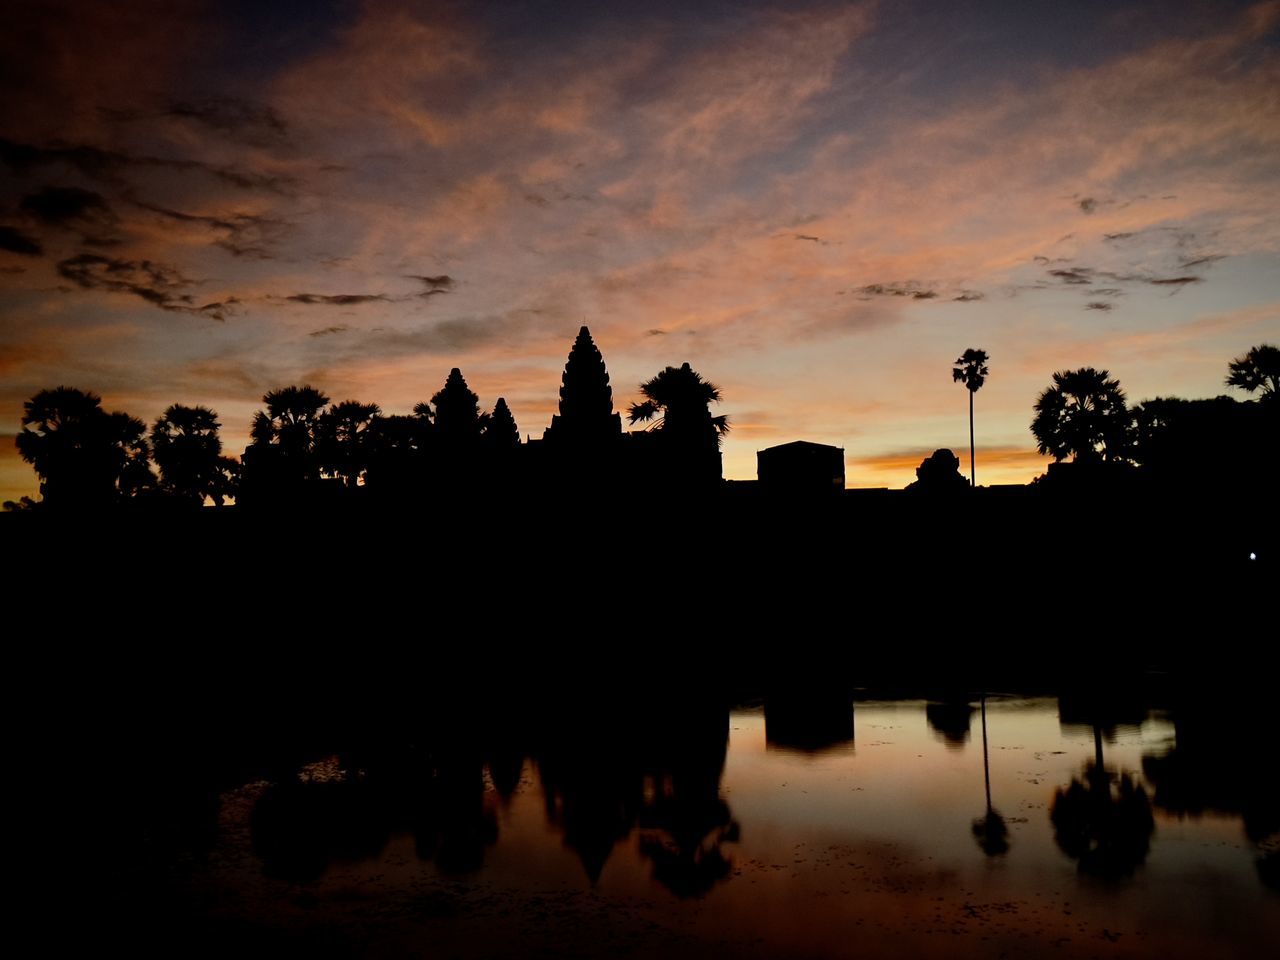 reflection, sky, silhouette, dawn, morning, water, architecture, sunrise, nature, horizon, cloud, built structure, travel destinations, tree, darkness, afterglow, building, no people, religion, building exterior, lake, temple - building, beauty in nature, tranquility, history, outdoors, sunlight, travel, scenics - nature, the past, plant, skyline, city, belief